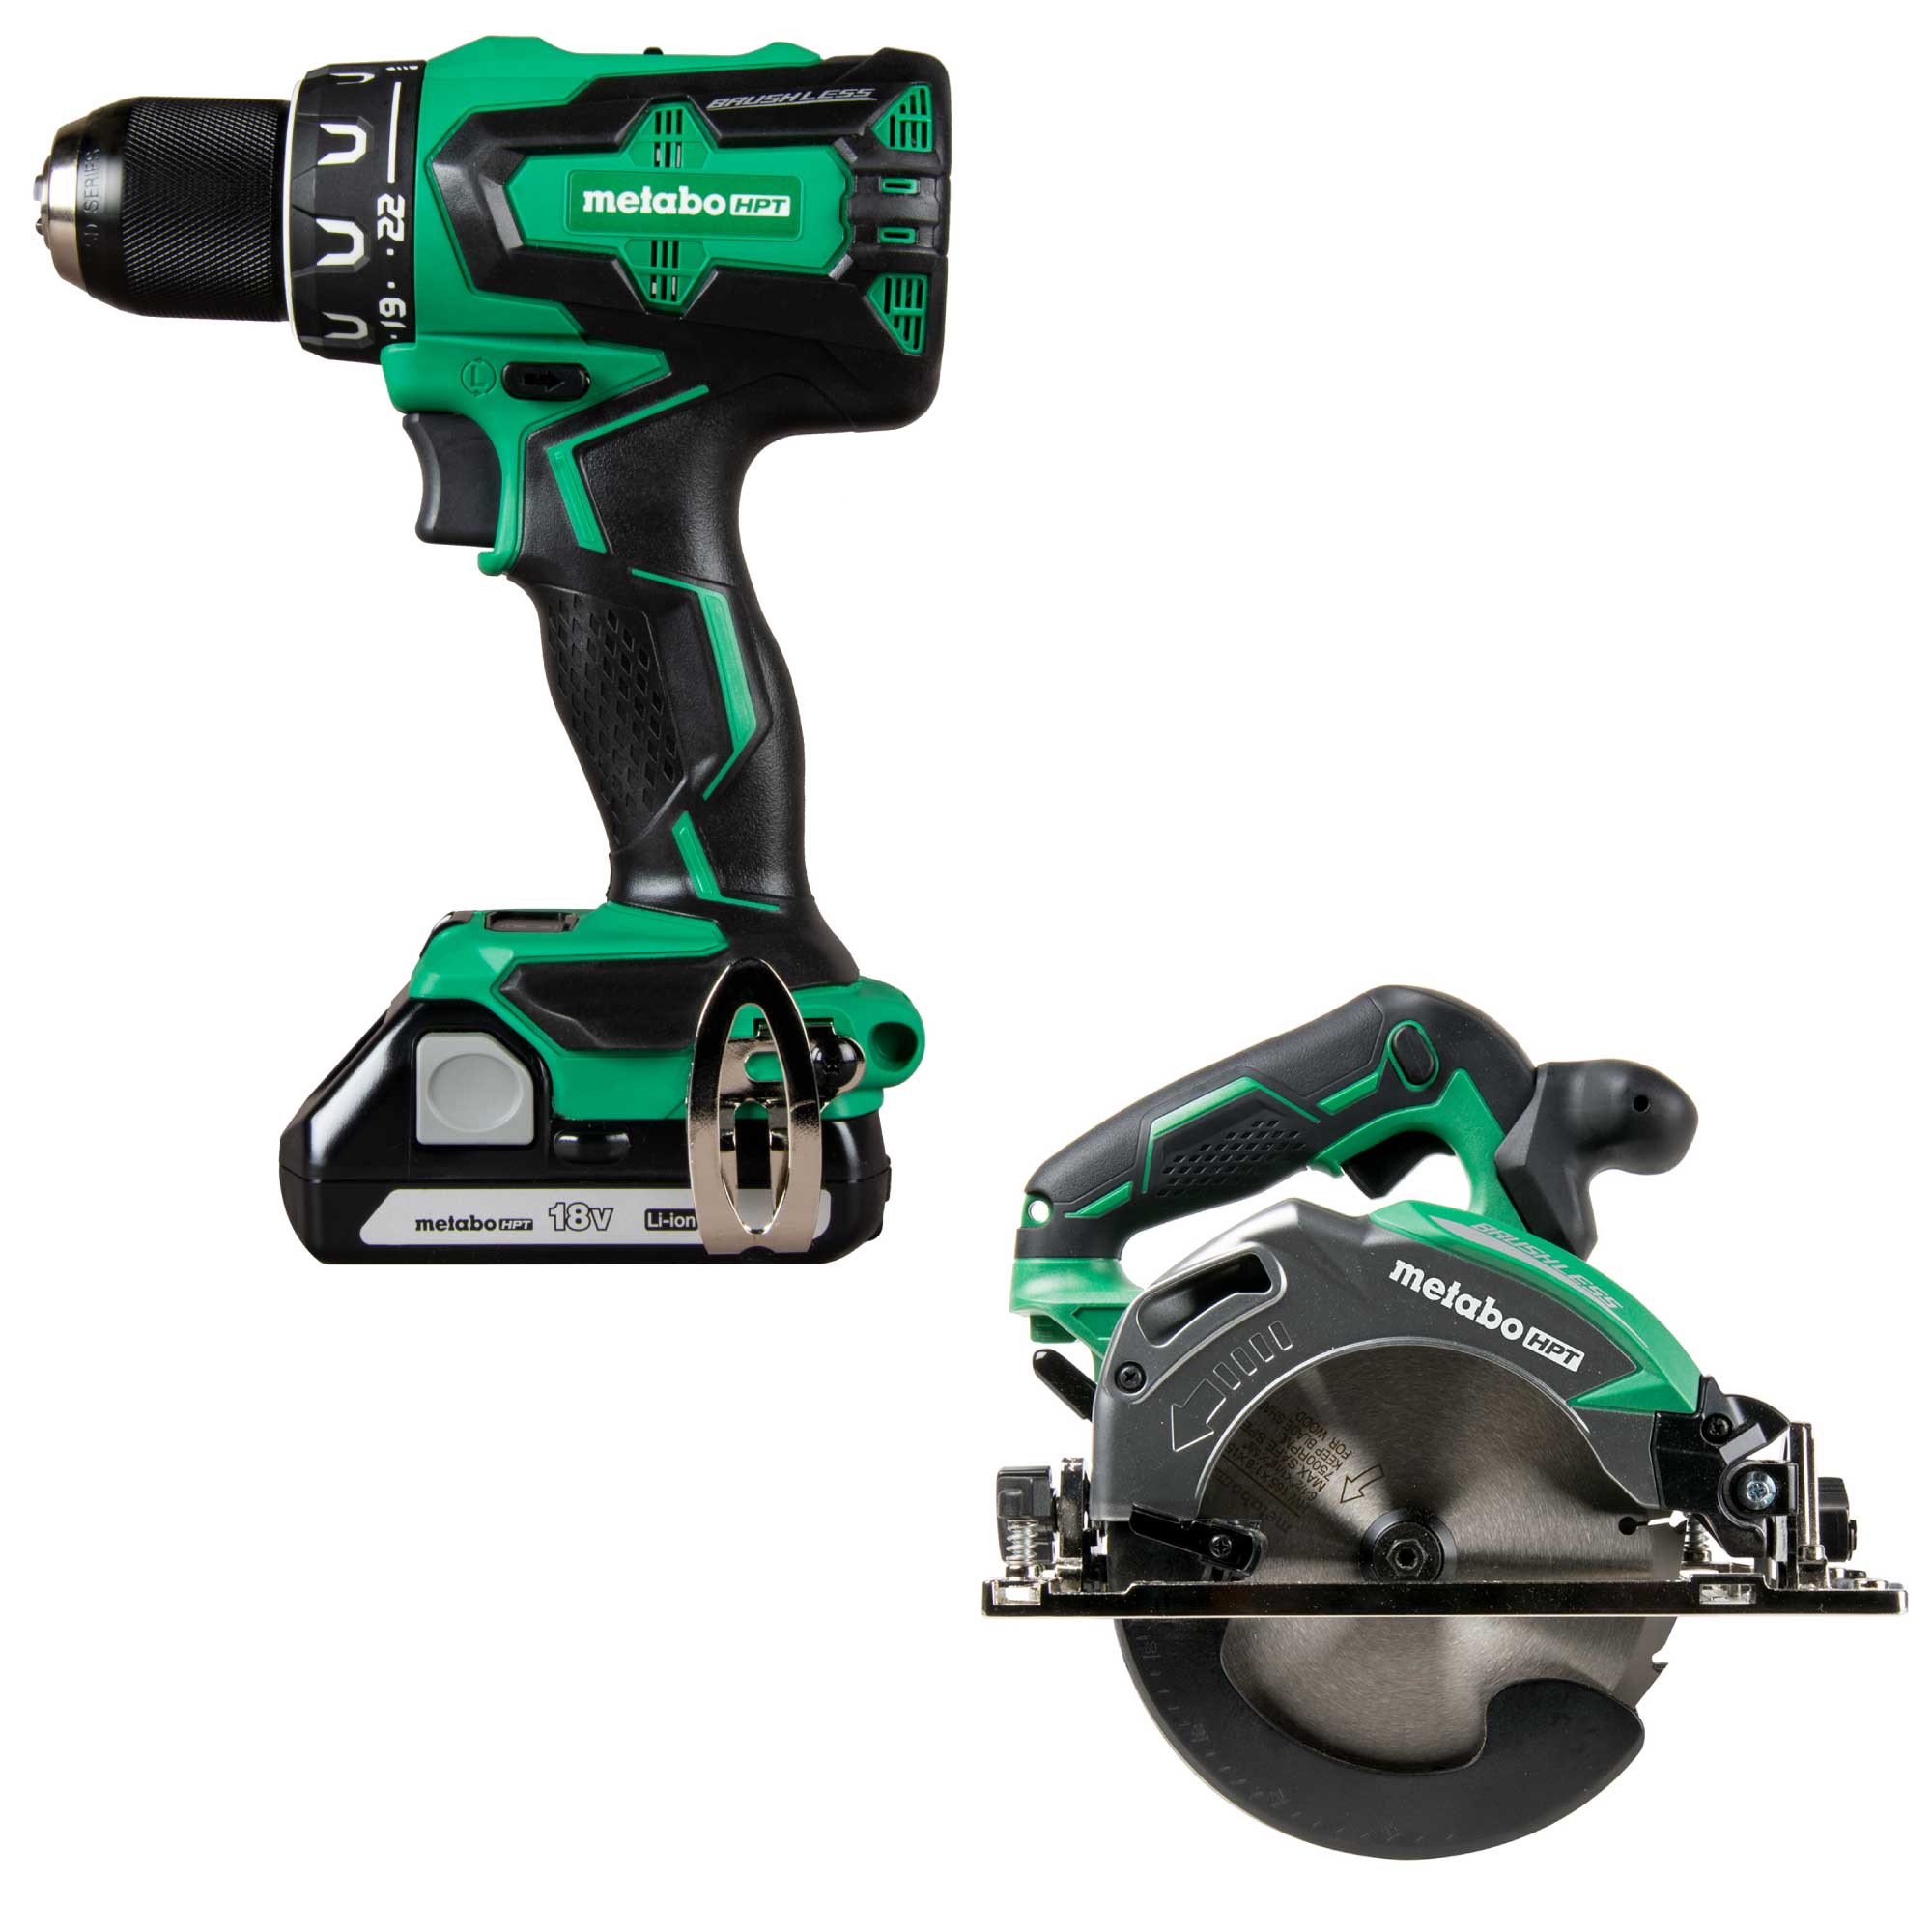 Metabo HPT MultiVolt 18-Volt 1/2-in Brushless Cordless Drill (2-batteries included and charger included) with MultiVolt 18-Volt 6-1/2-in Cordless